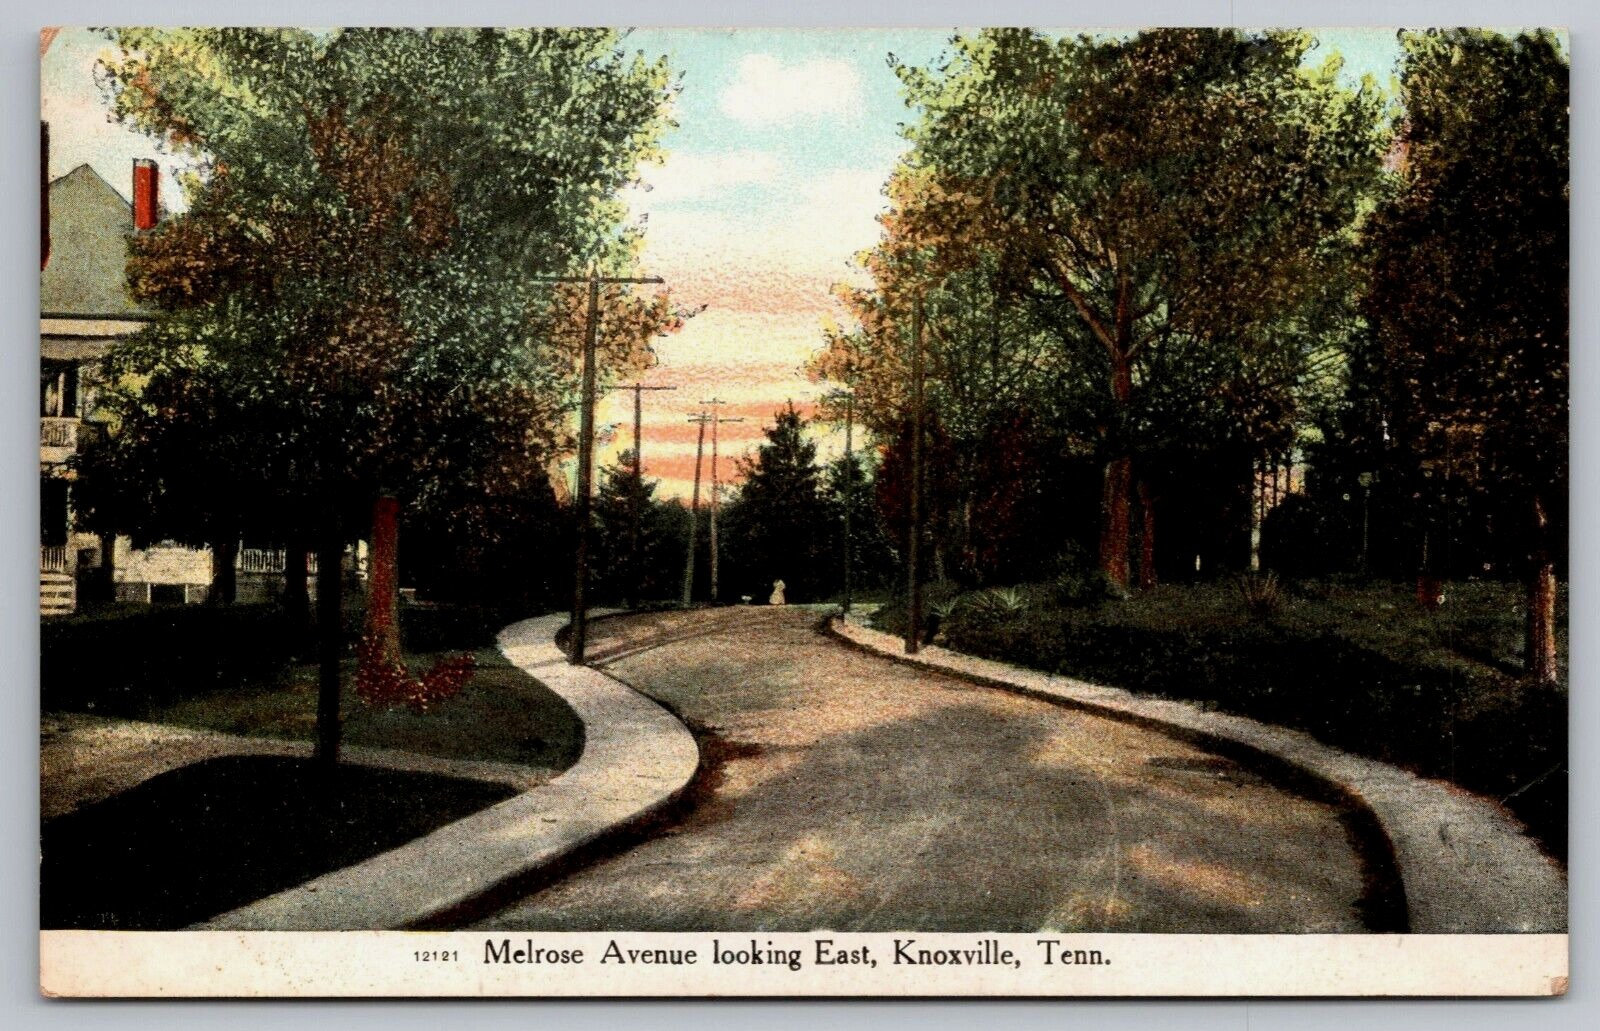 Melrose Avenue Looking East Knoxville TN Postcard Hand Colored Lithograph